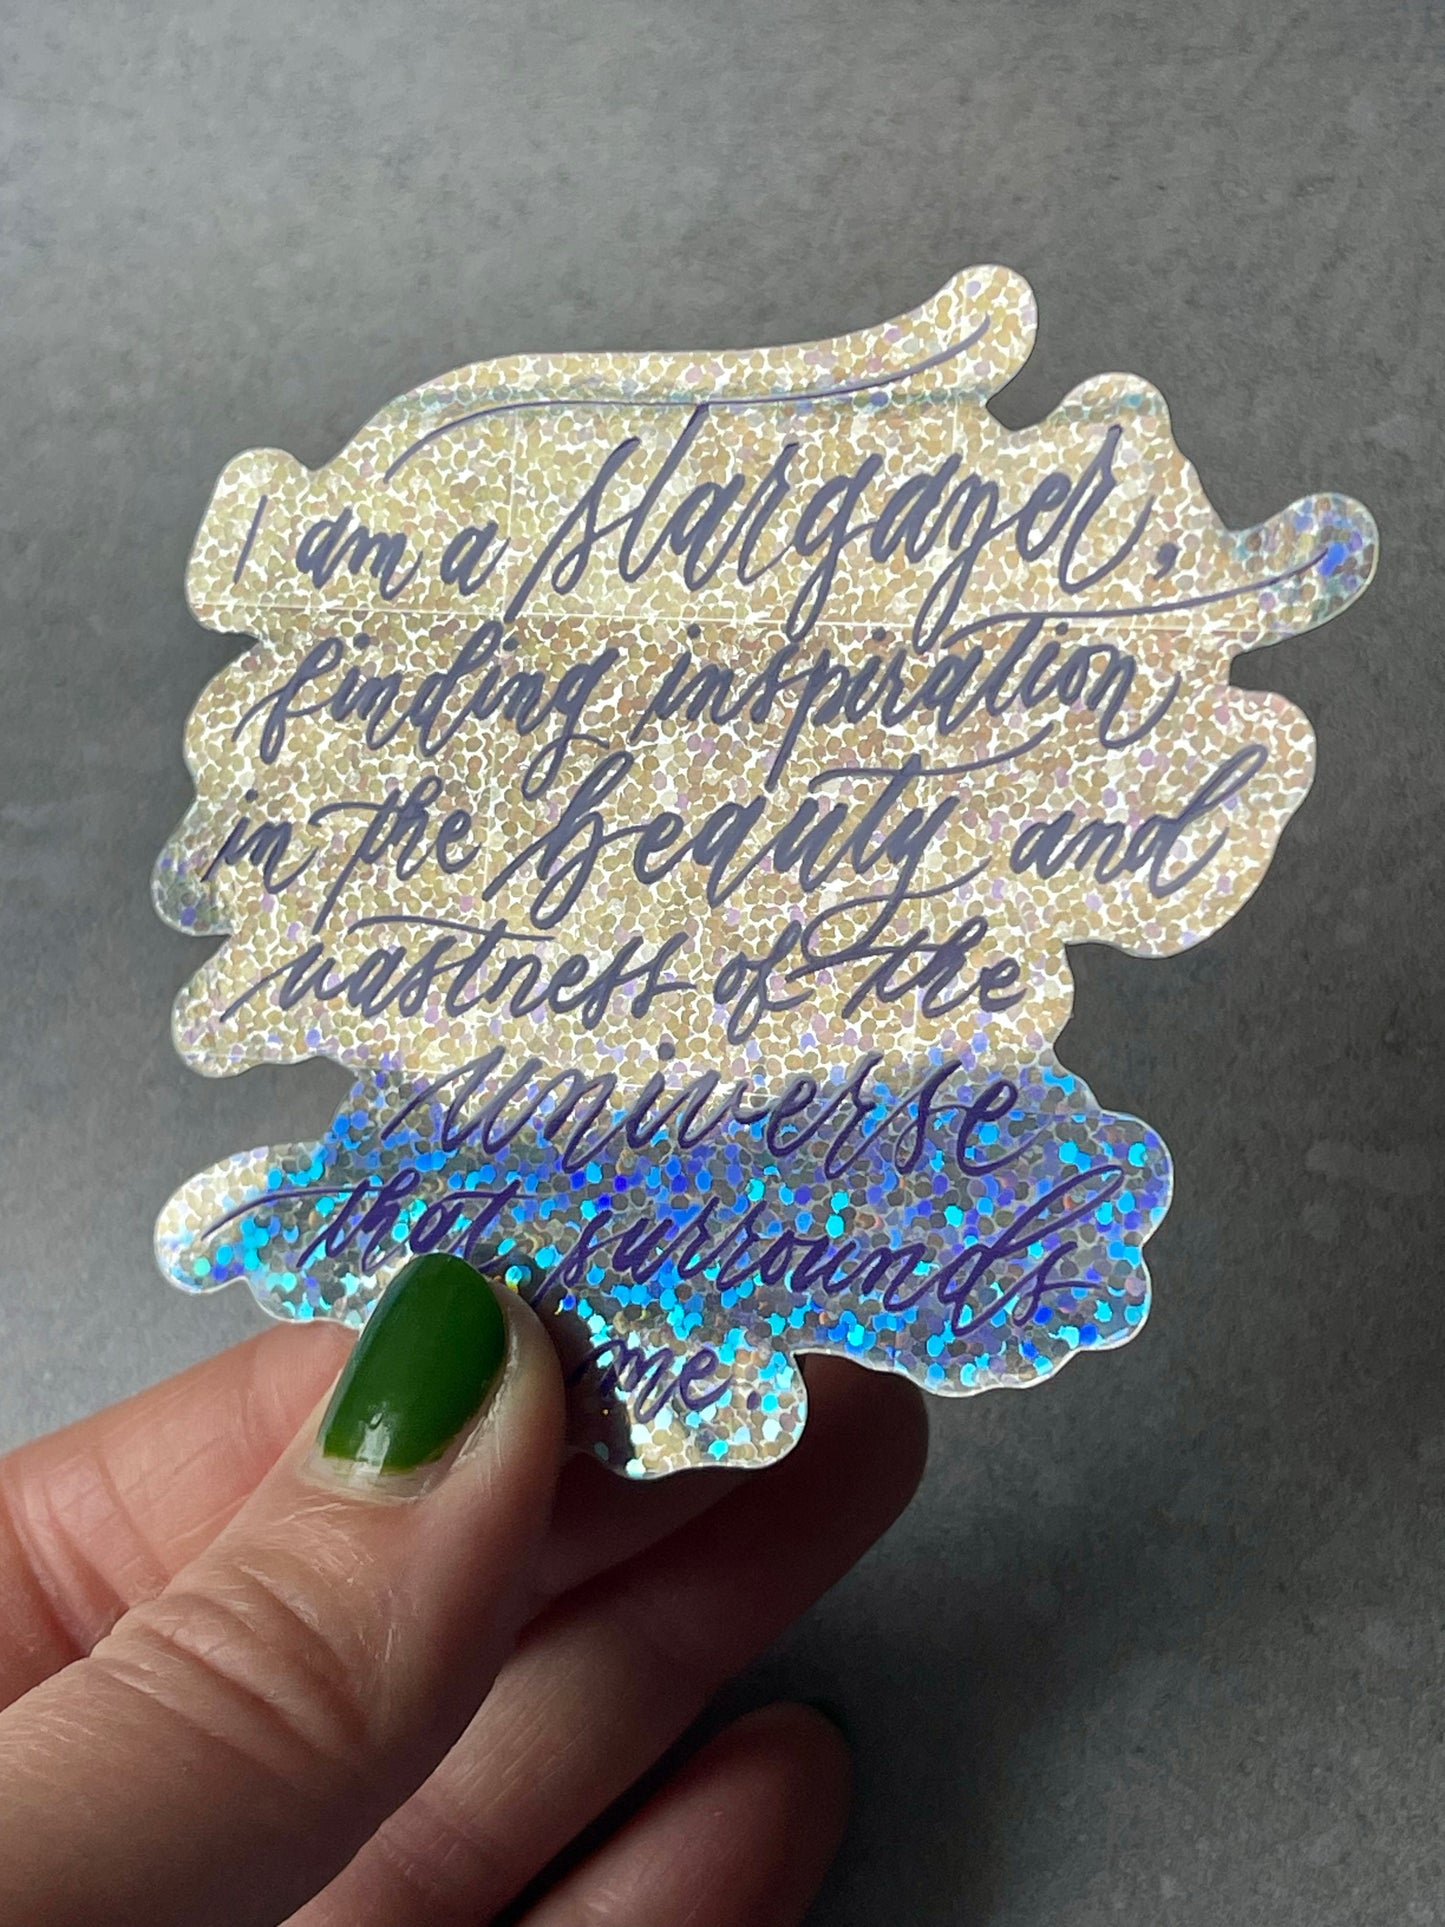 I am a stargazer finding inspiration in the beauty and vastness of the universe that surrounds me script calligraphy glitter sticker in shiny view to the side with blue ombre glitter at the bottom catching light.